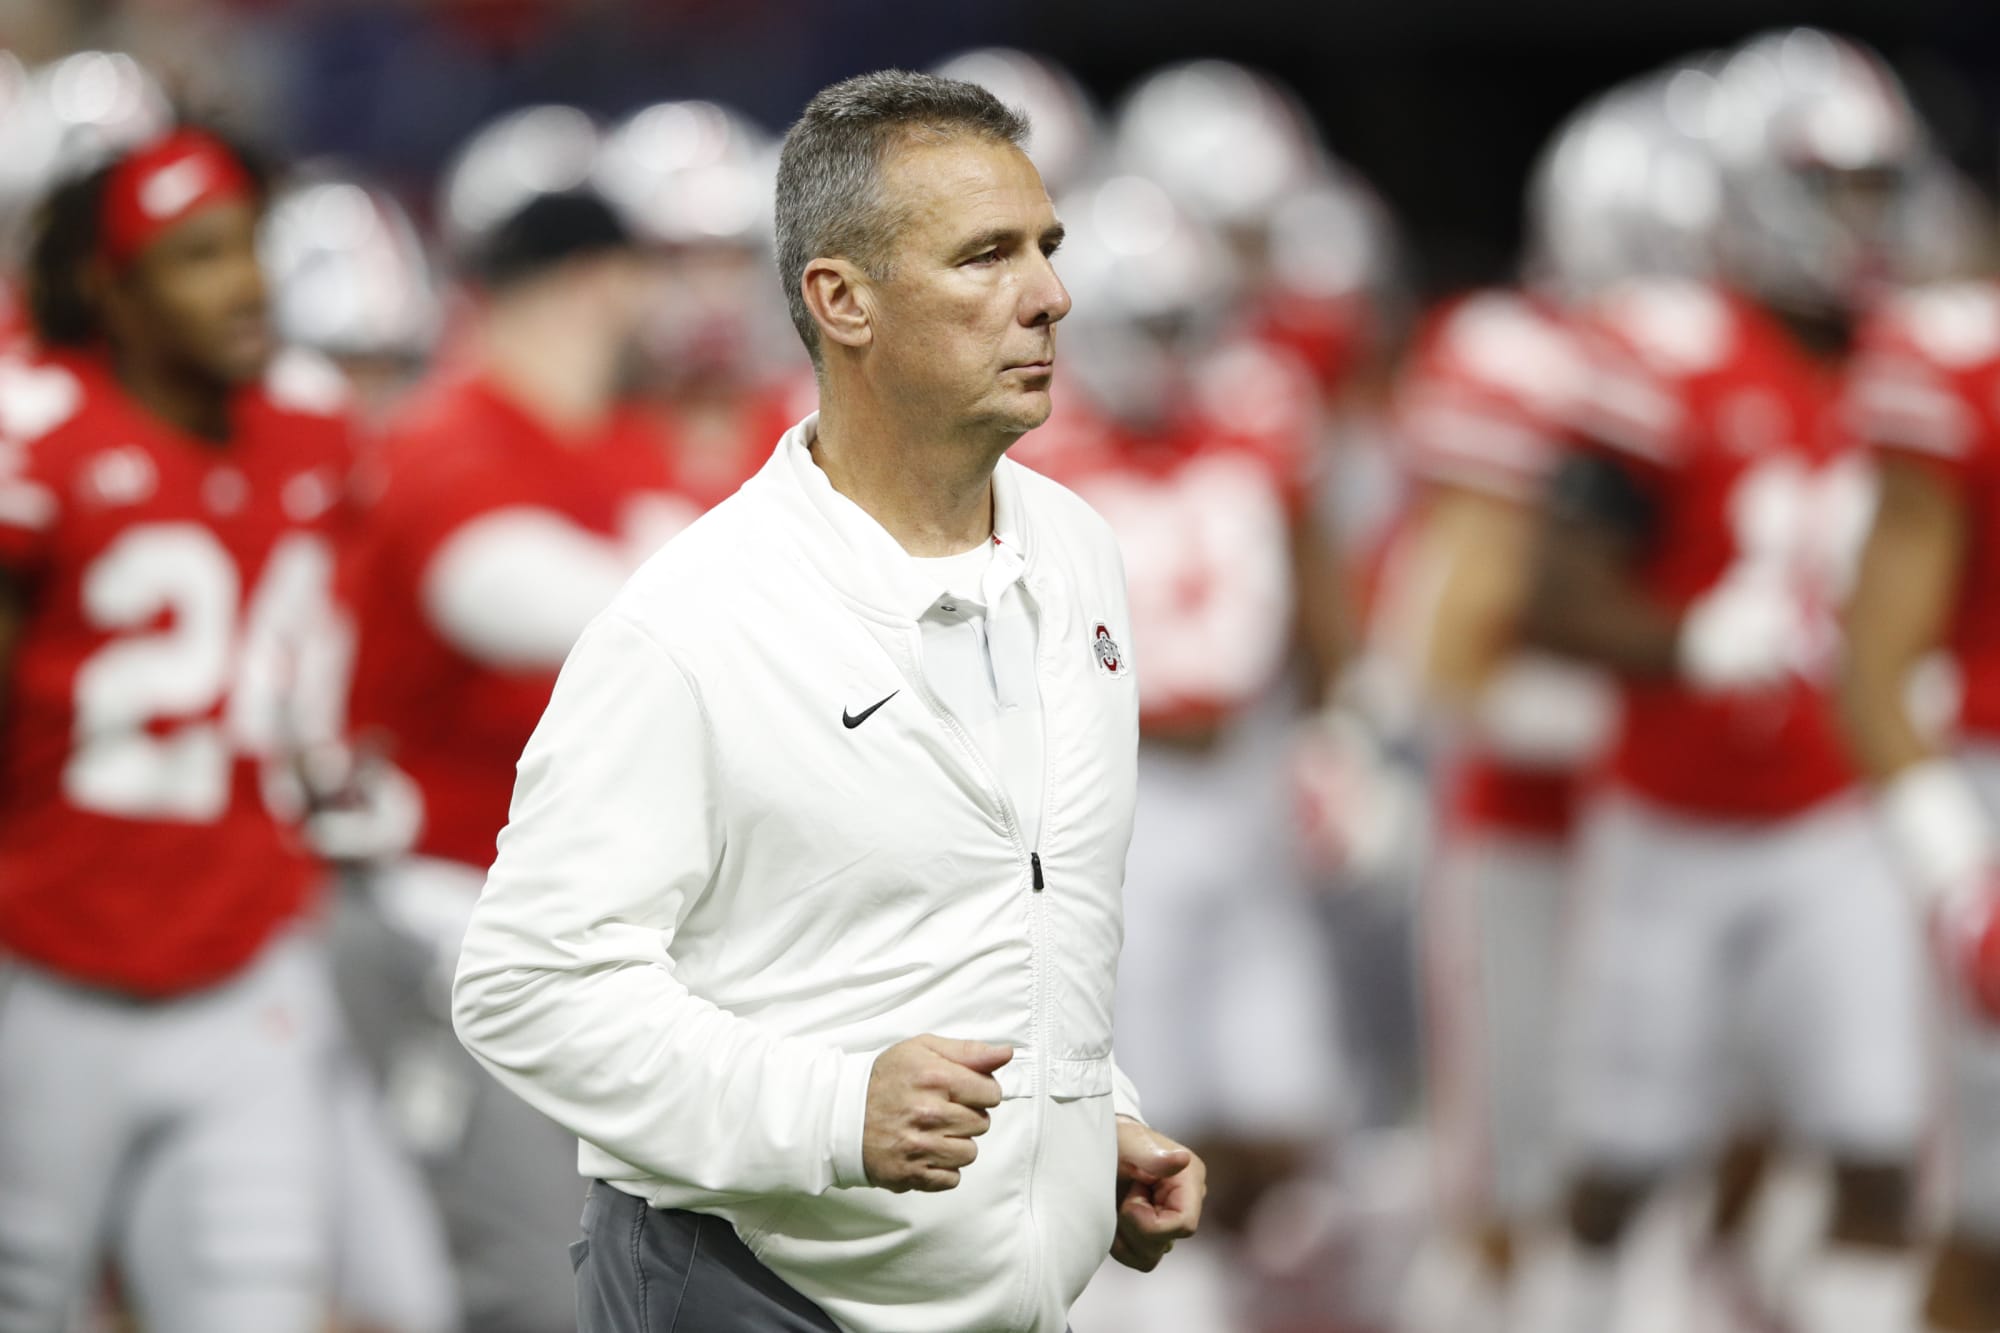 Urban Meyer has retired. Could he jump to the NFL?